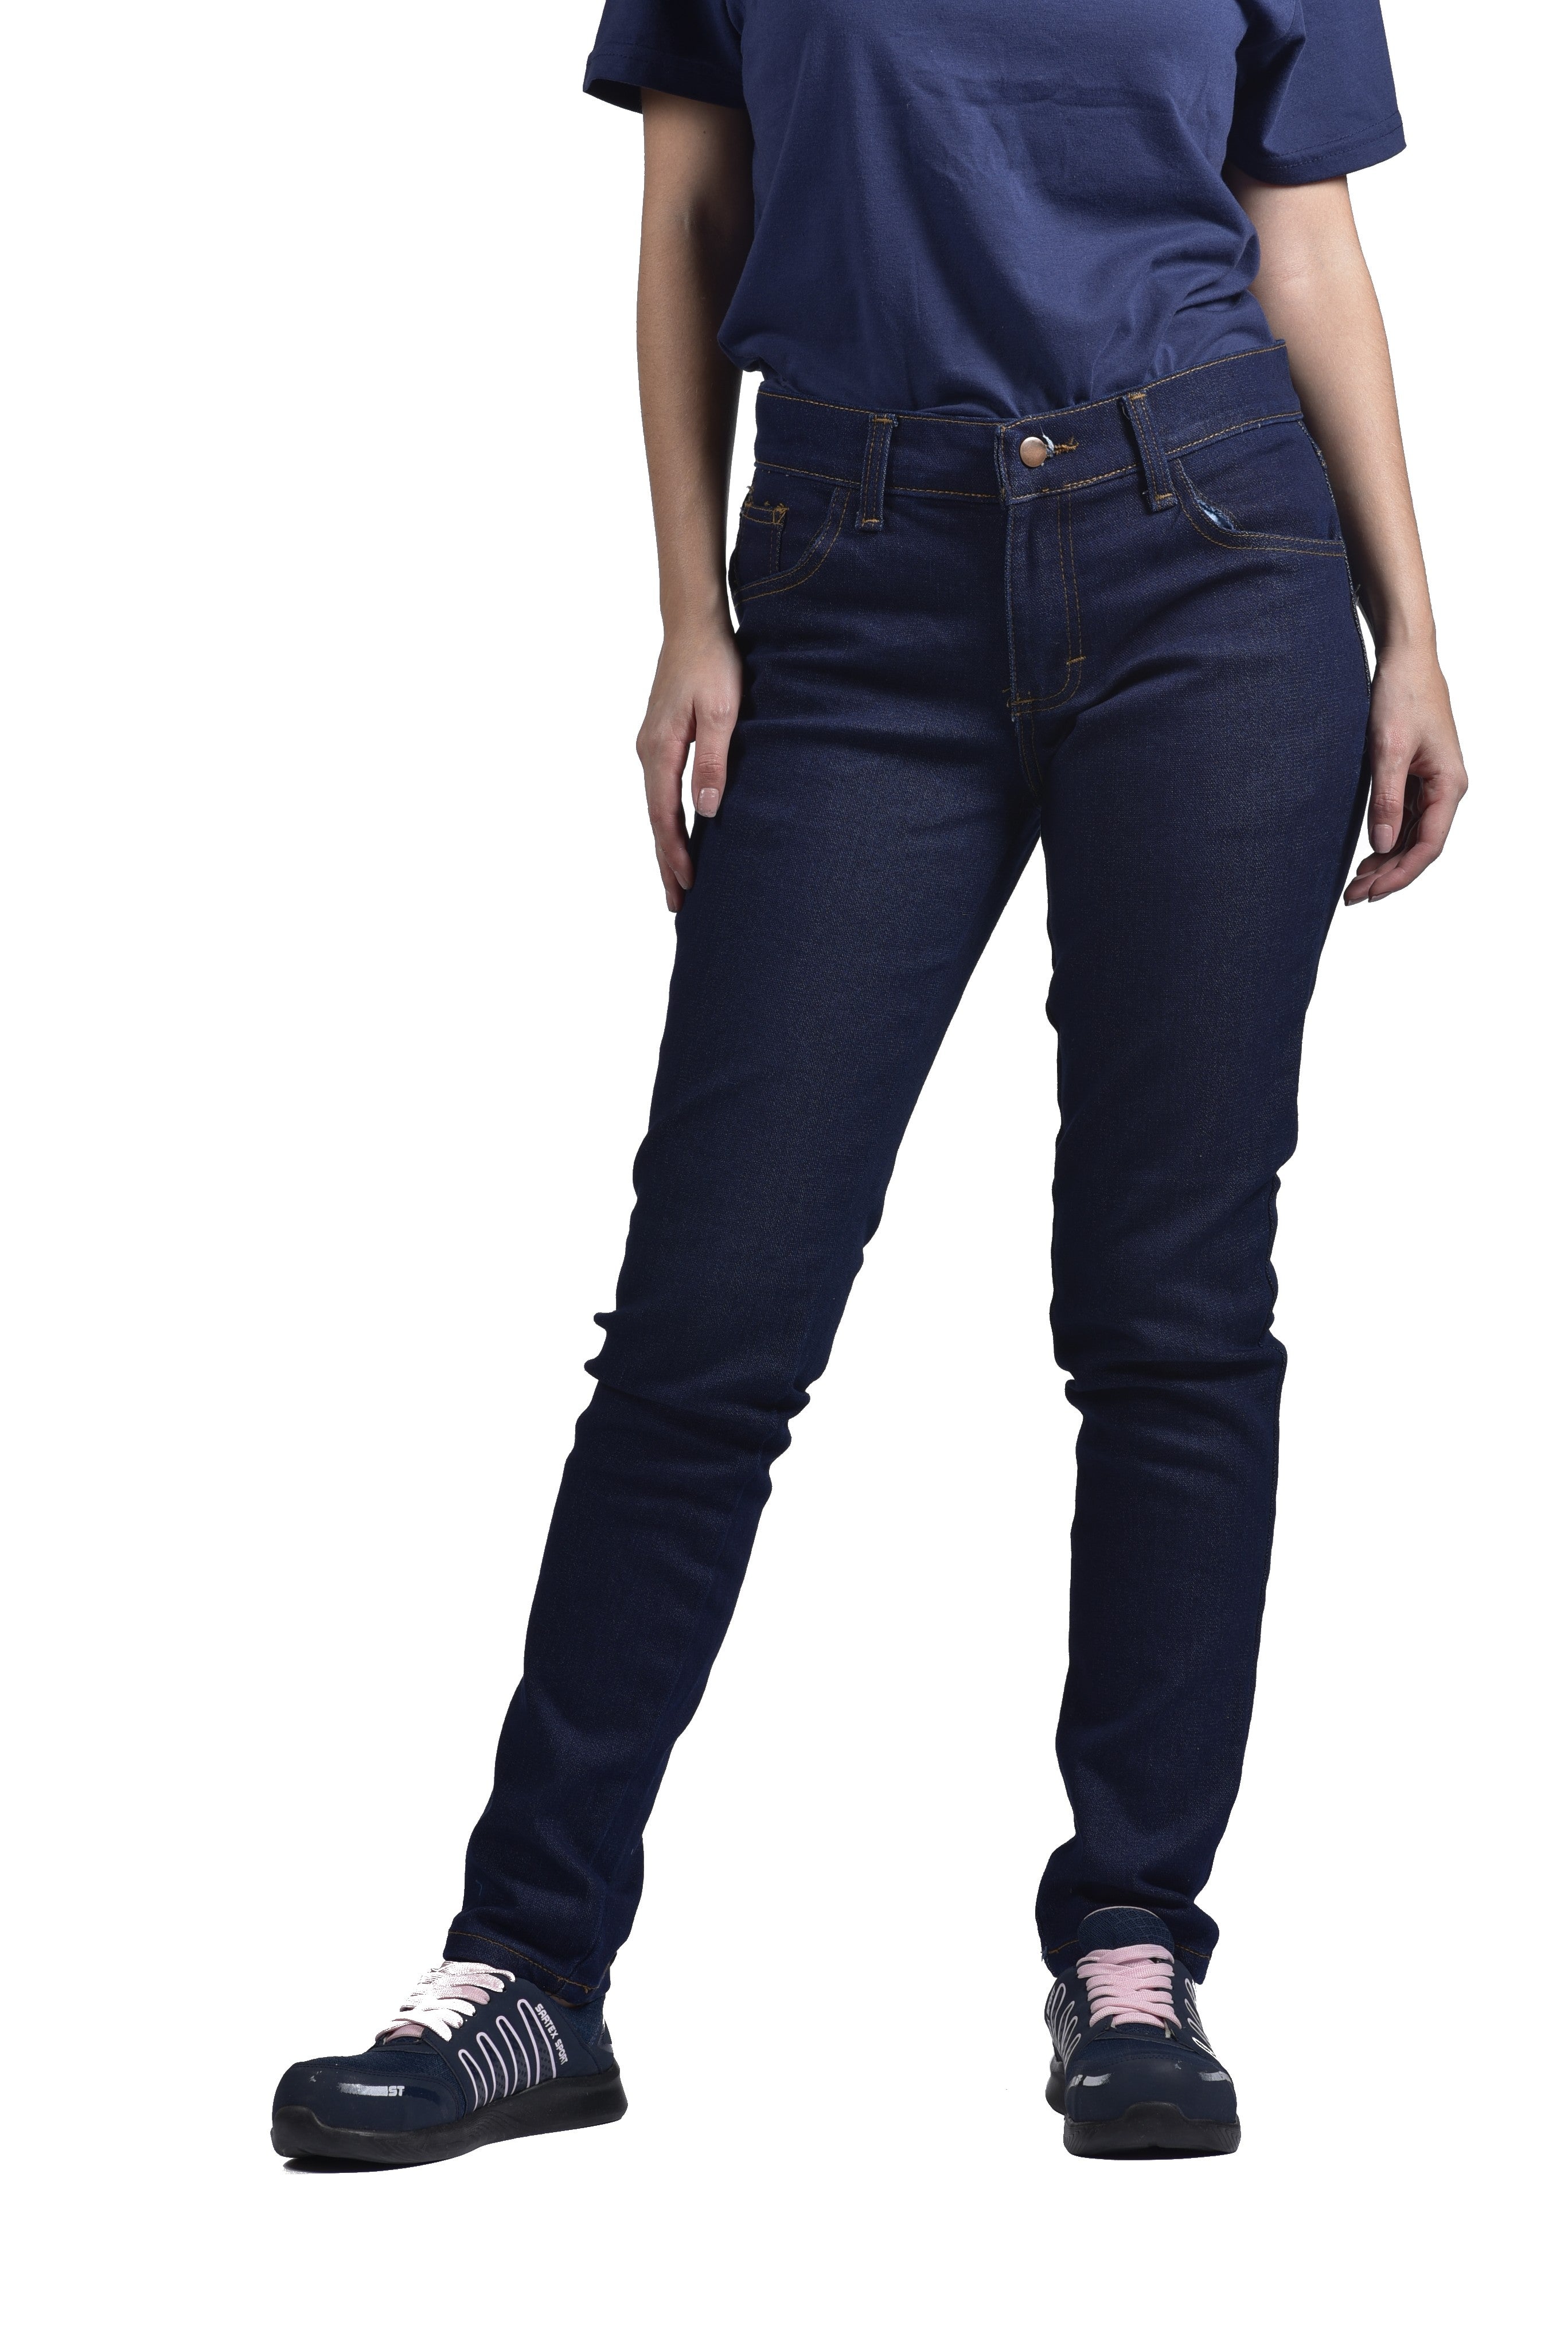 Jeans Industrial Para Mujer –